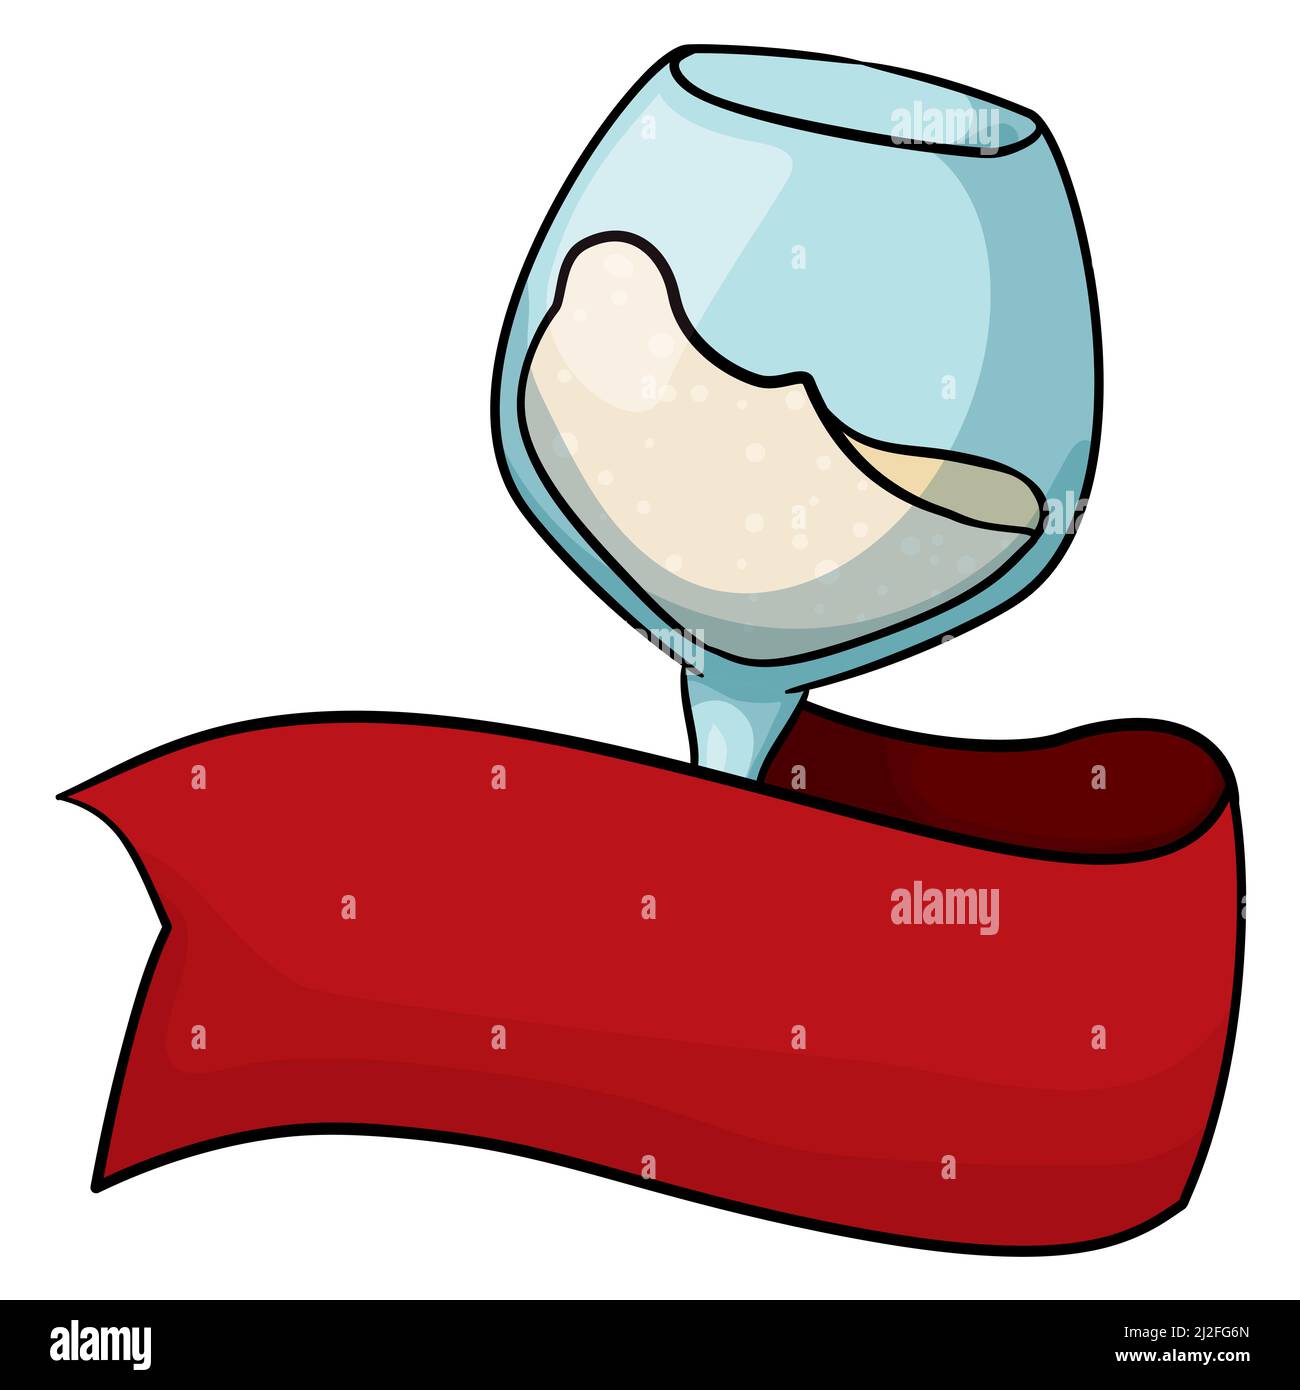 Template with empty red ribbon decorating an elegant wine glass with delicious champagne. Design in cartoon style. Stock Vector